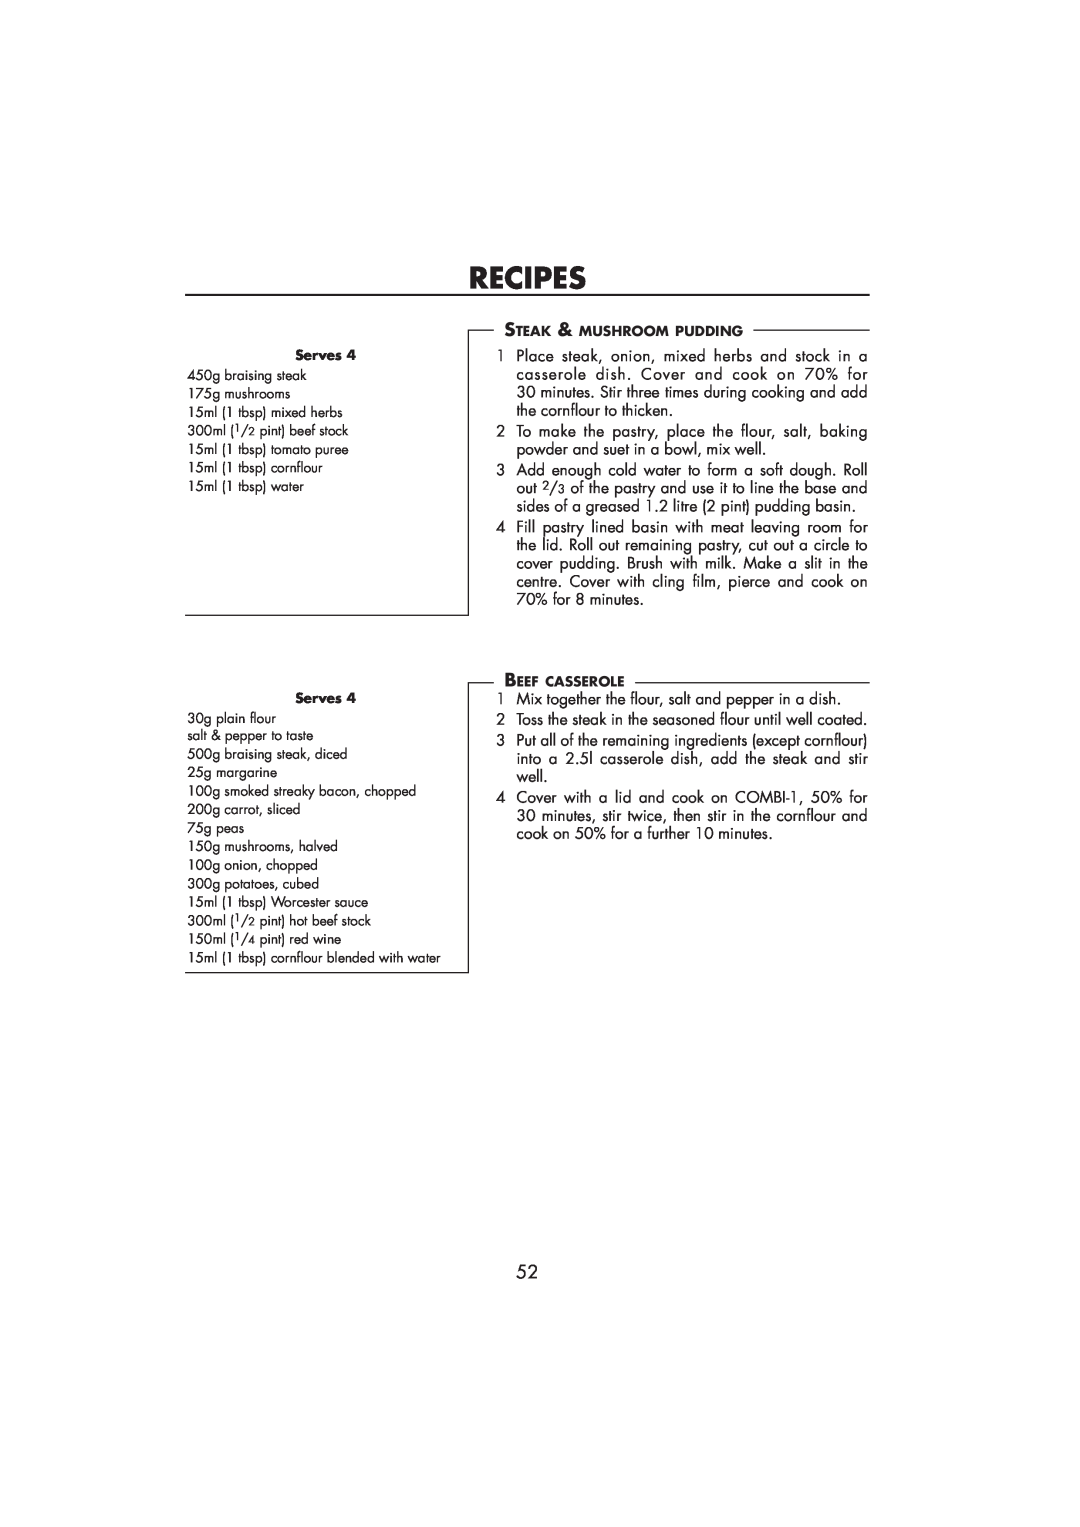 Sharp R-890SLM operation manual Recipes, Mix together the flour, salt and pepper in a dish 